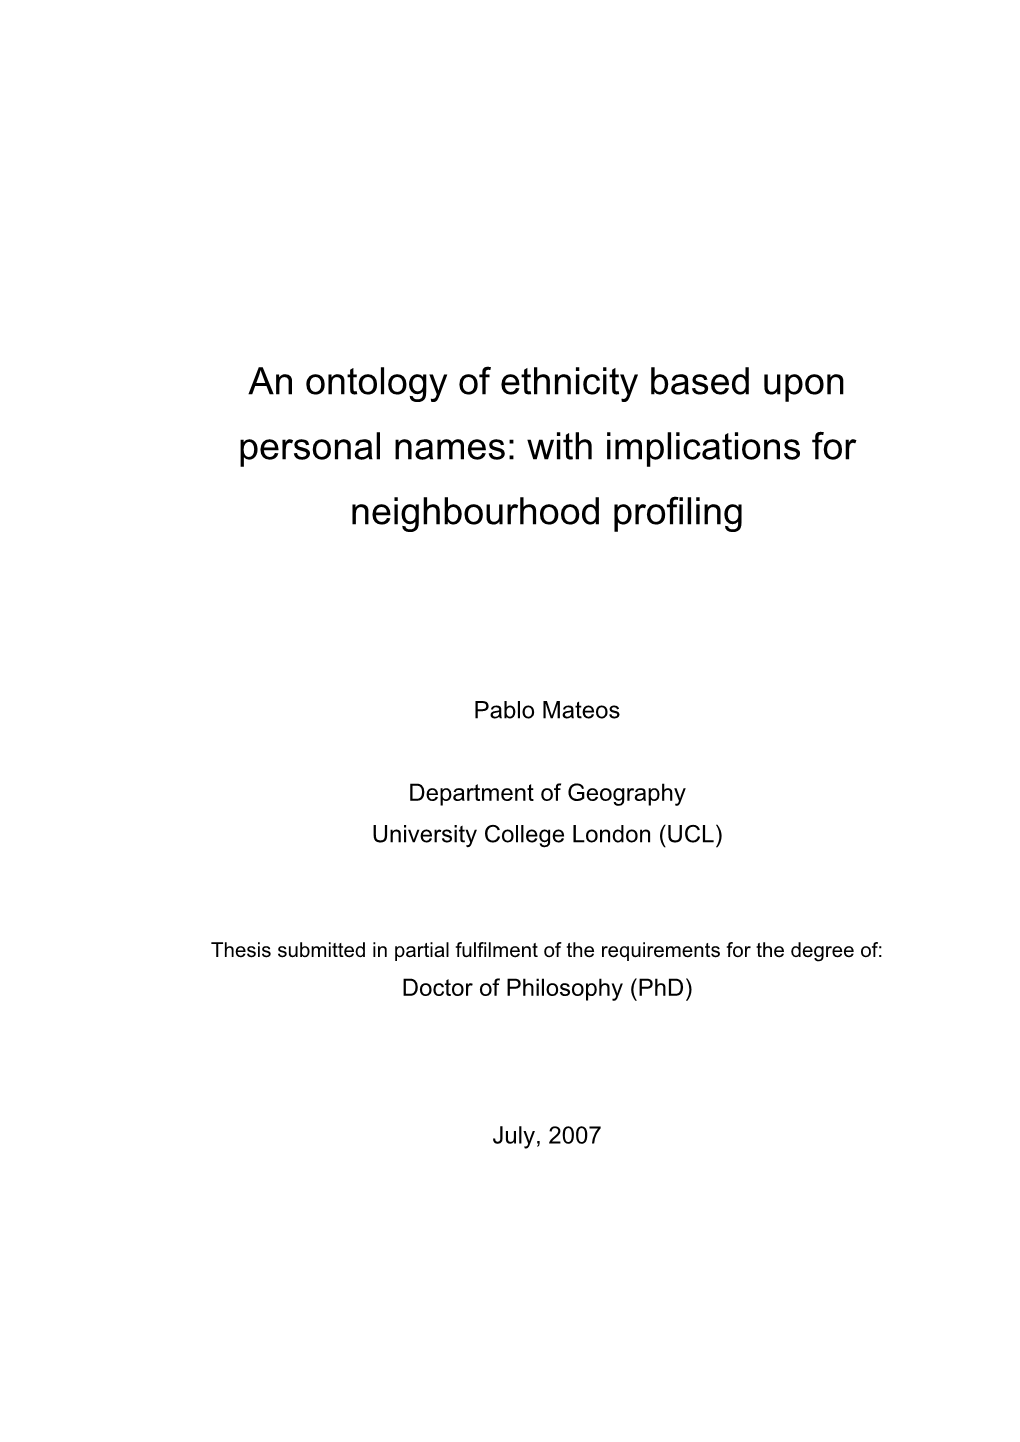 An Ontology of Ethnicity Based Upon Personal Names with Implications